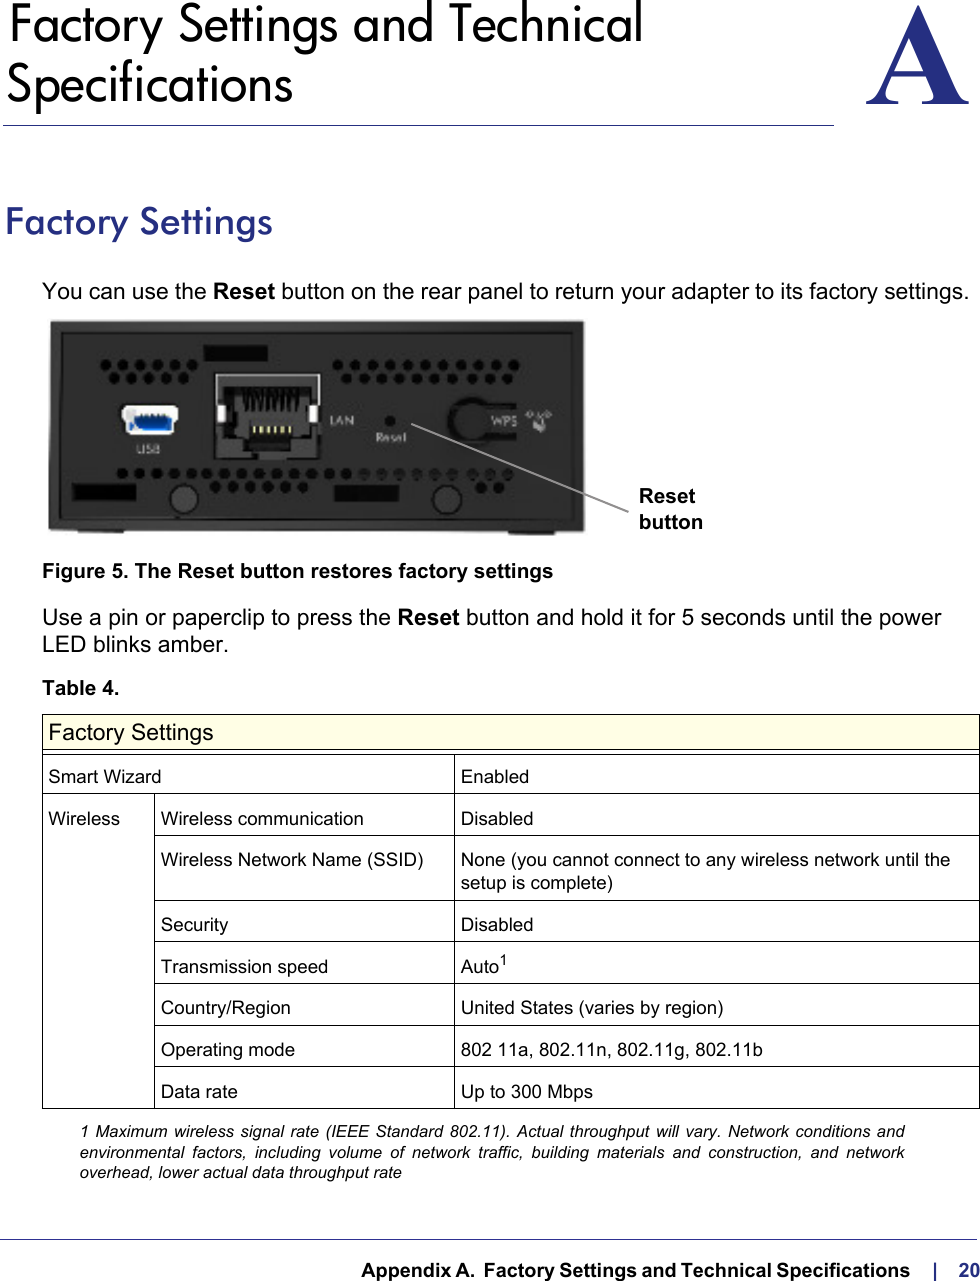   Appendix A.  Factory Settings and Technical Specifications     |    20AA.   Factory Settings and Technical SpecificationsFactory SettingsYou can use the Reset button on the rear panel to return your adapter to its factory settings. ResetbuttonFigure 5. The Reset button restores factory settingsUse a pin or paperclip to press the Reset button and hold it for 5 seconds until the power LED blinks amber.Table 4.  Factory SettingsSmart Wizard EnabledWireless Wireless communication Disabled Wireless Network Name (SSID) None (you cannot connect to any wireless network until the setup is complete)Security DisabledTransmission speed Auto11 Maximum wireless signal rate (IEEE Standard 802.11). Actual throughput will vary. Network conditions and environmental factors, including volume of network traffic, building materials and construction, and network overhead, lower actual data throughput rateCountry/Region United States (varies by region)Operating mode 802 11a, 802.11n, 802.11g, 802.11bData rate Up to 300 Mbps